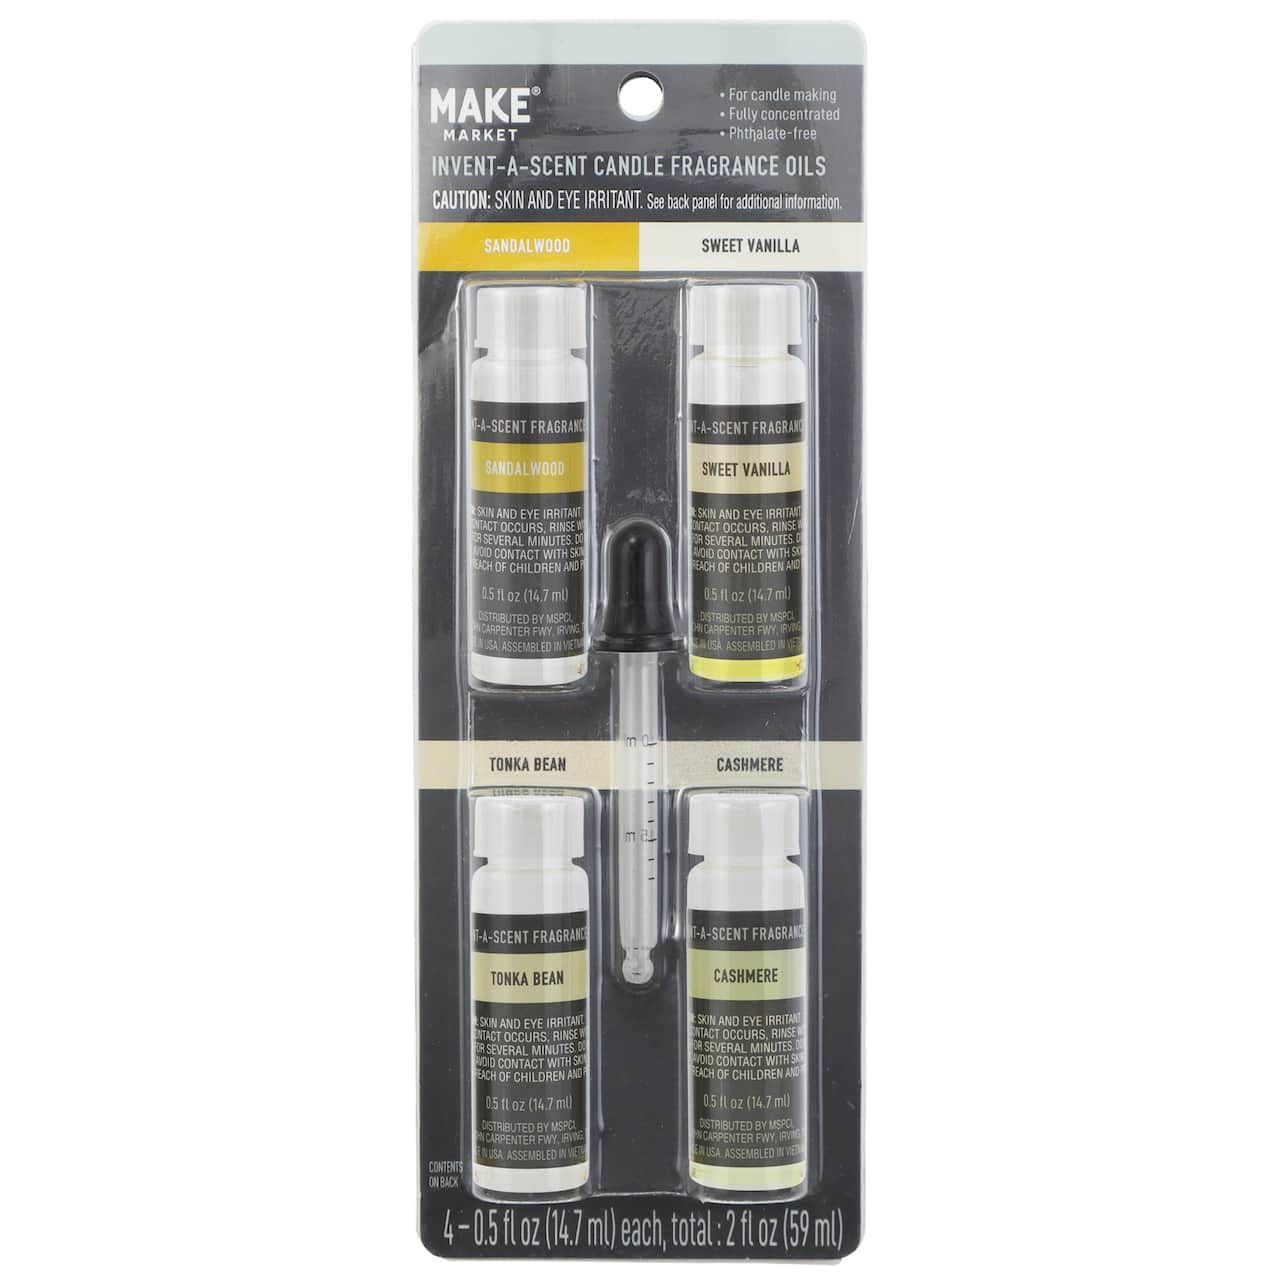 Invent-a-Scent Lux Living Candle Fragrance Oil Set by Make Market